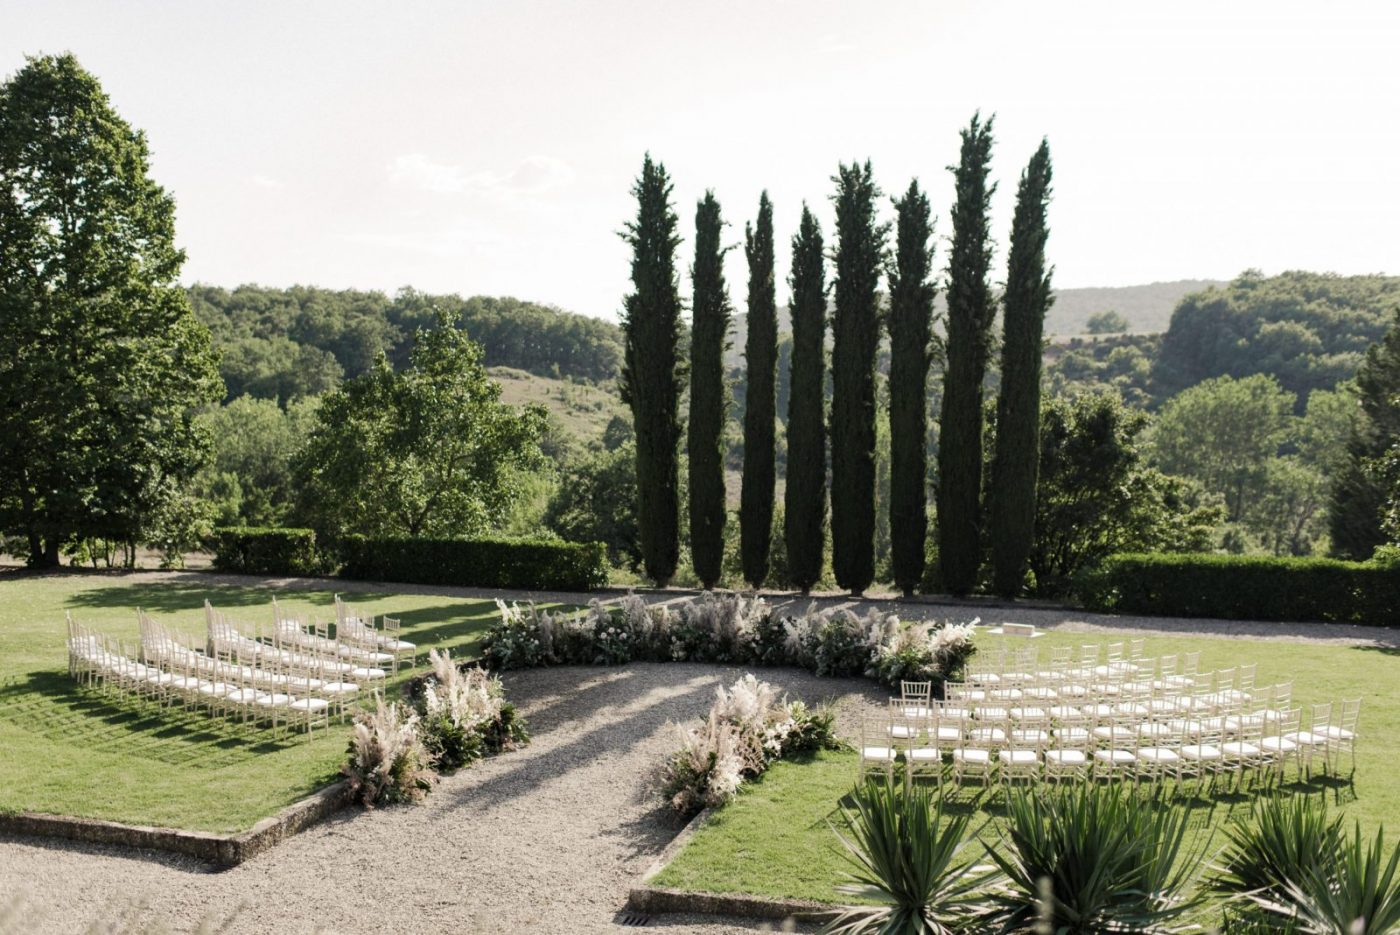 Creative Seating Ideas to Make Your Wedding Ceremony Unforgettable